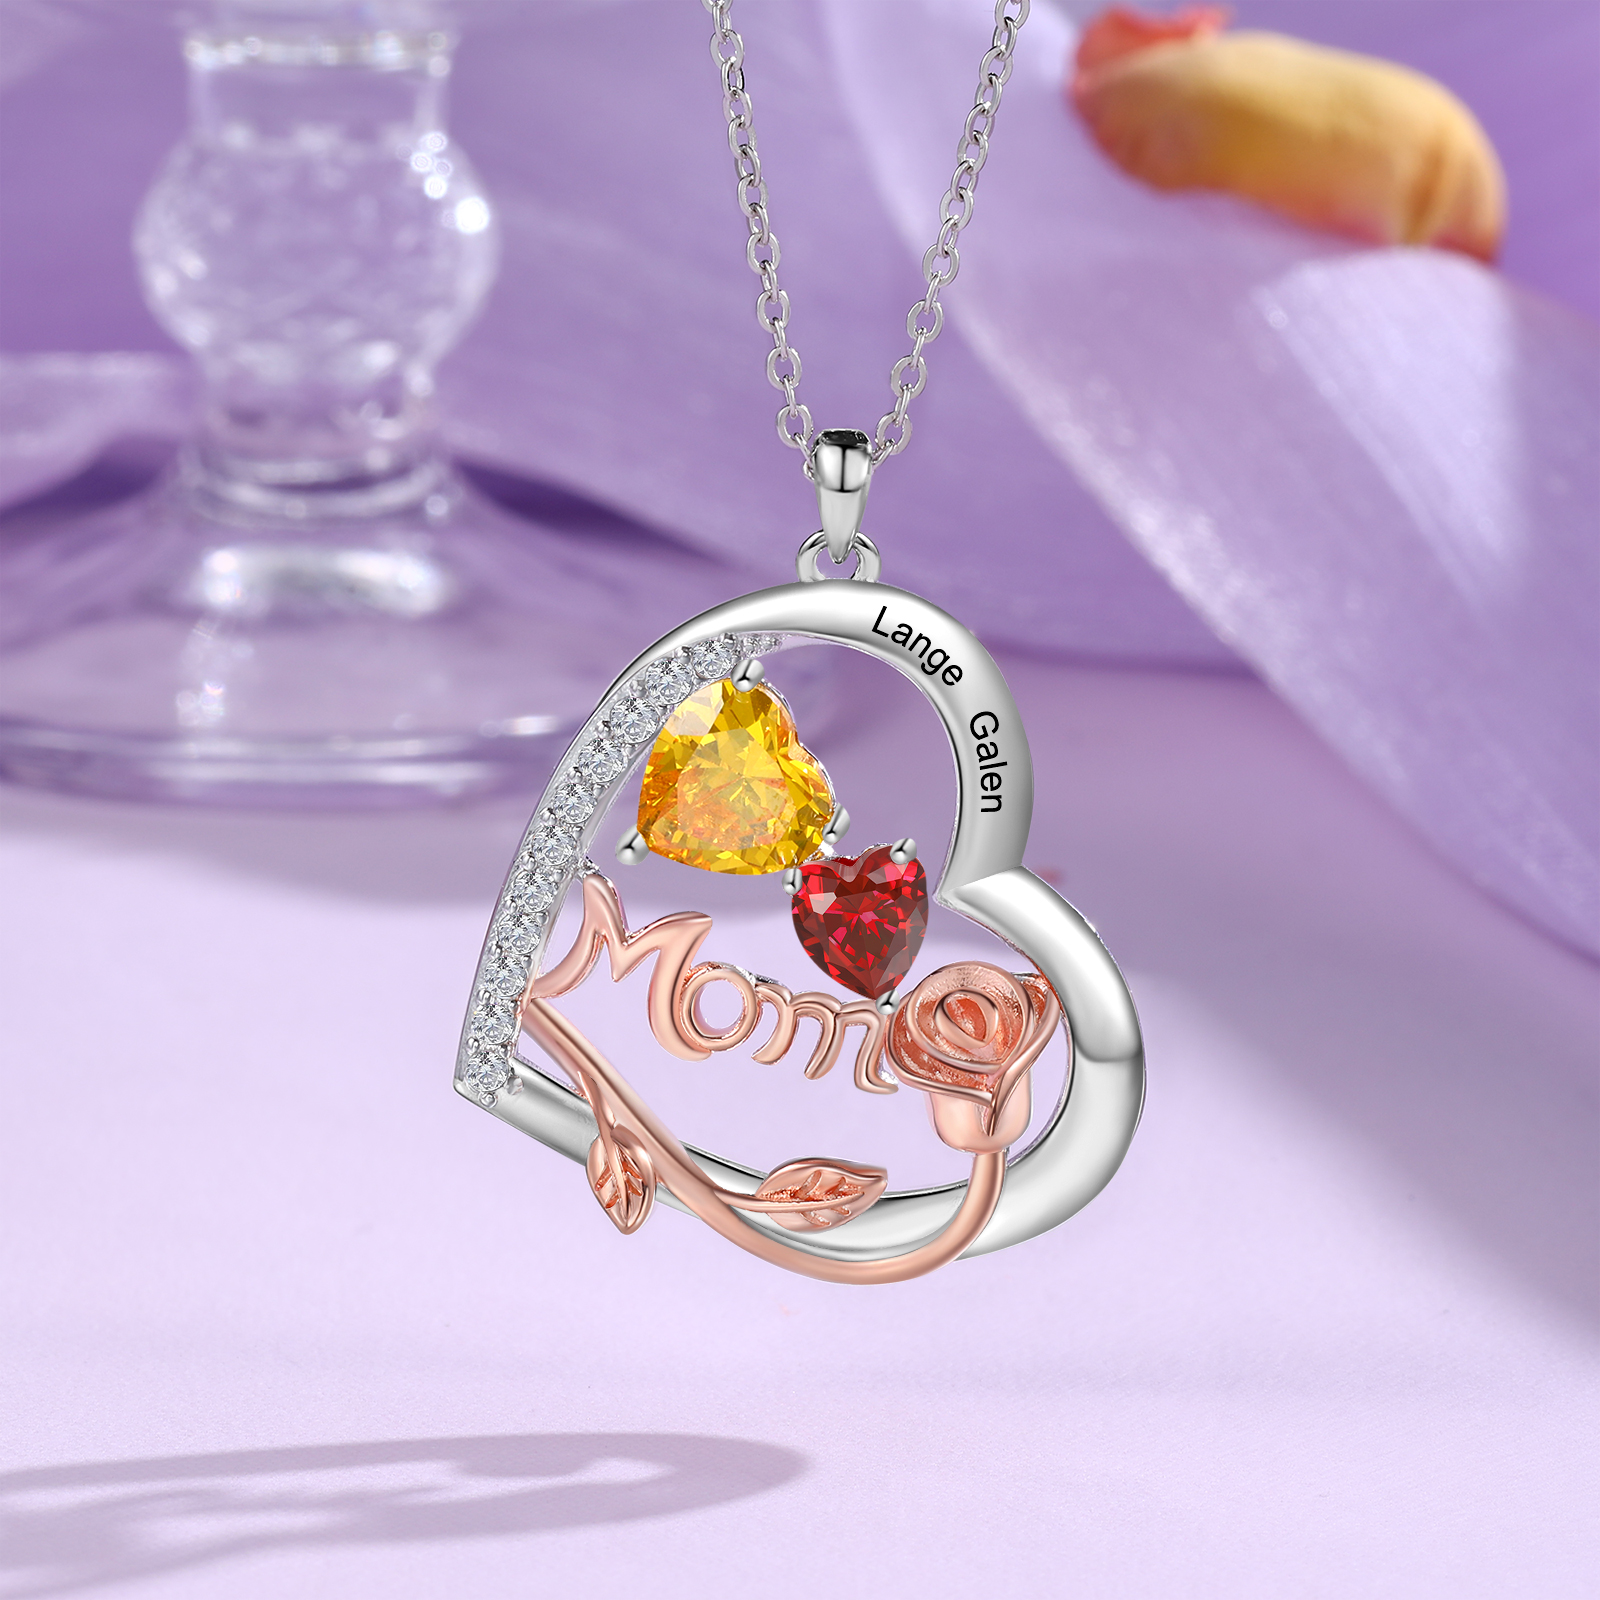 2 Names - Personalized Silver Heart Necklace with Birthstone and Name as a Mother's Day Gift for Mom